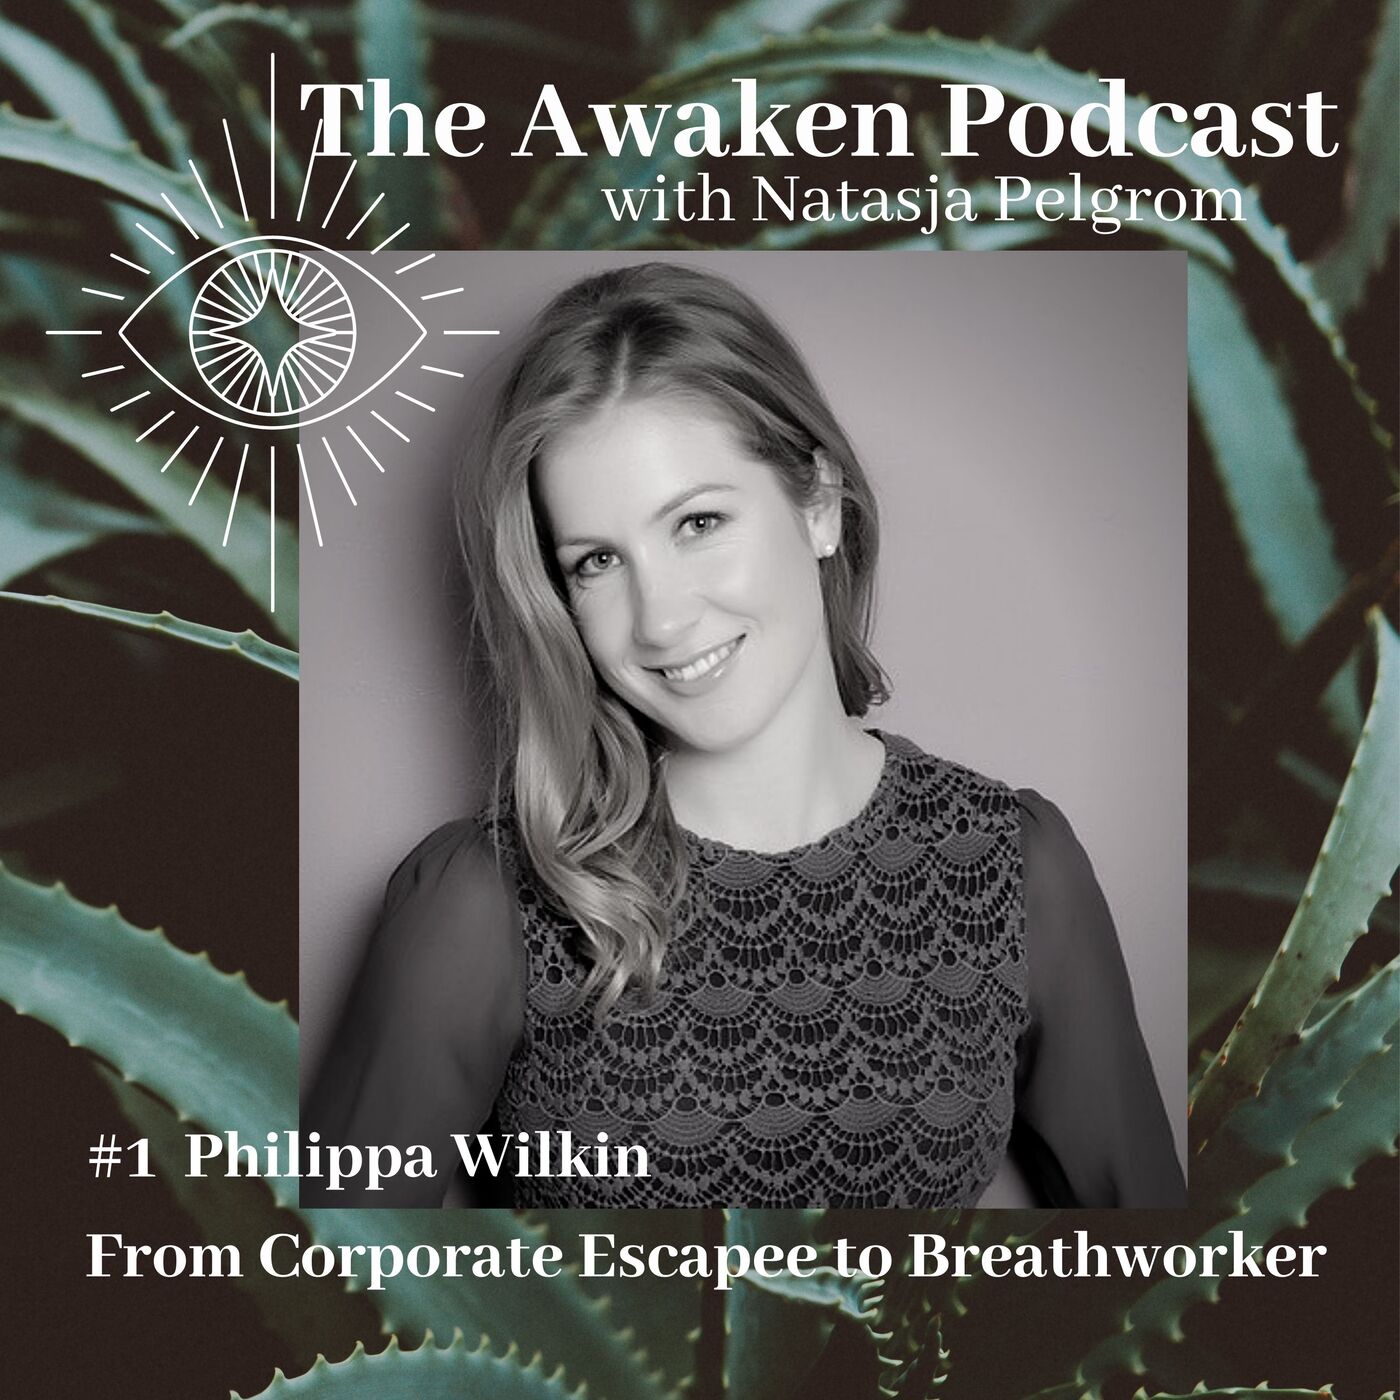 Natasja with Philipa Wilkin – From Corporate Escapee to Breathworker